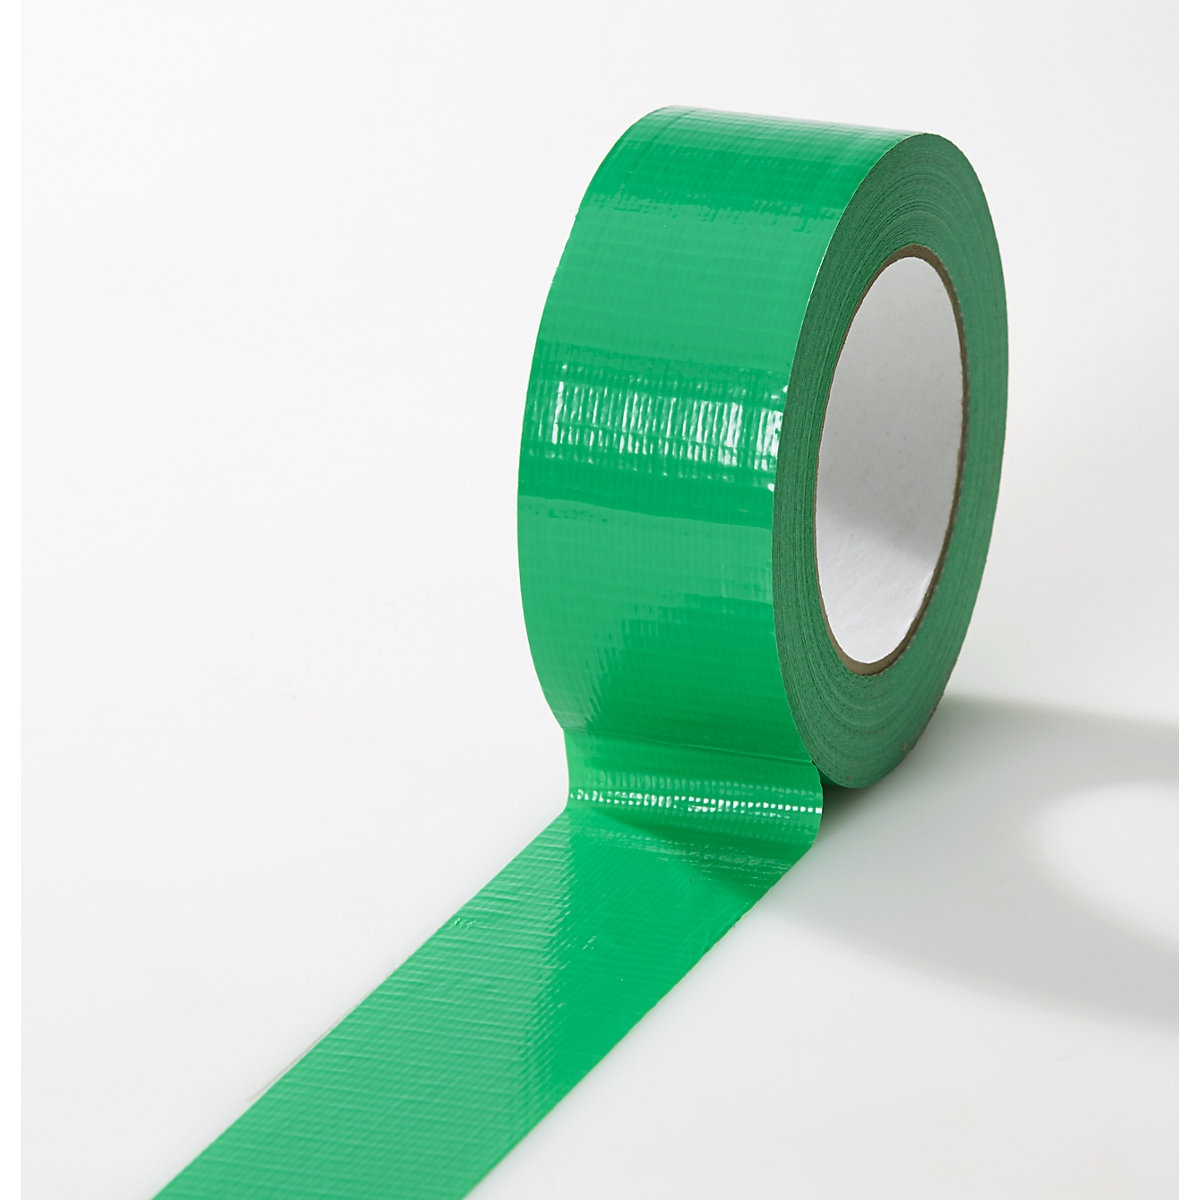 Fabric tape, in different colours, pack of 24 rolls, green, tape width 38 mm-19